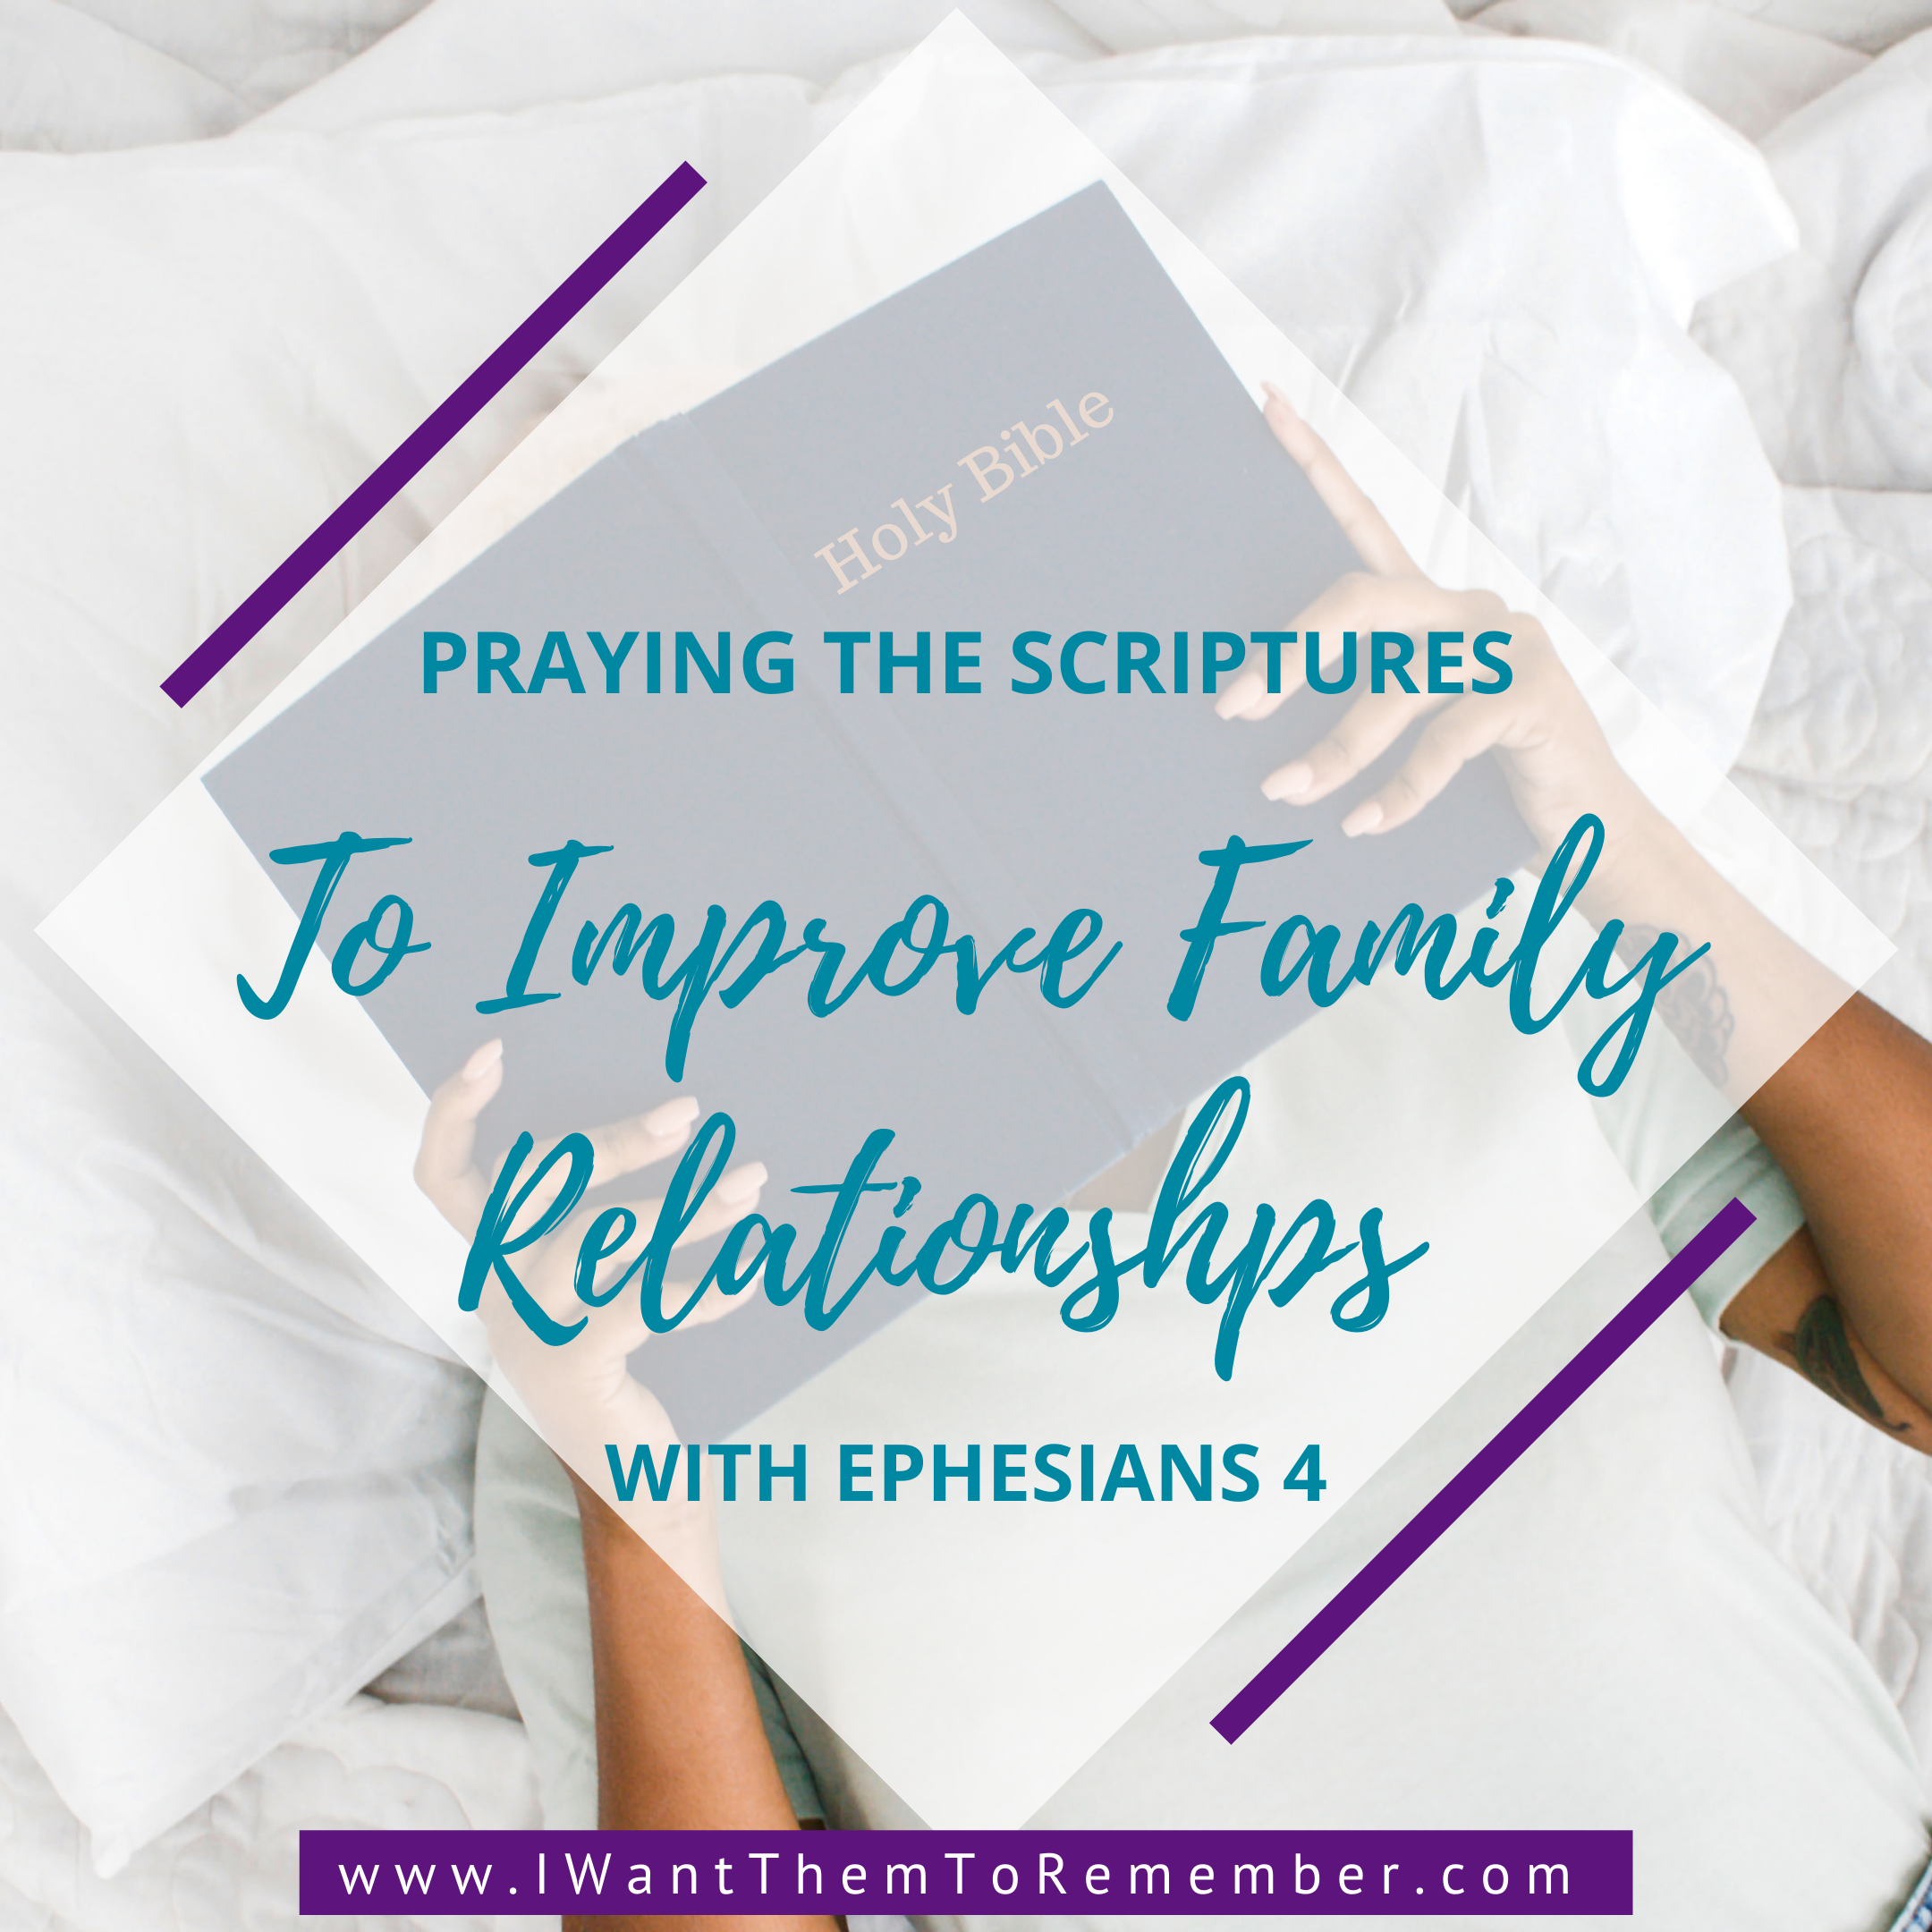 Praying the Scriptures to Improve Family Relationships Using Ephesians 4